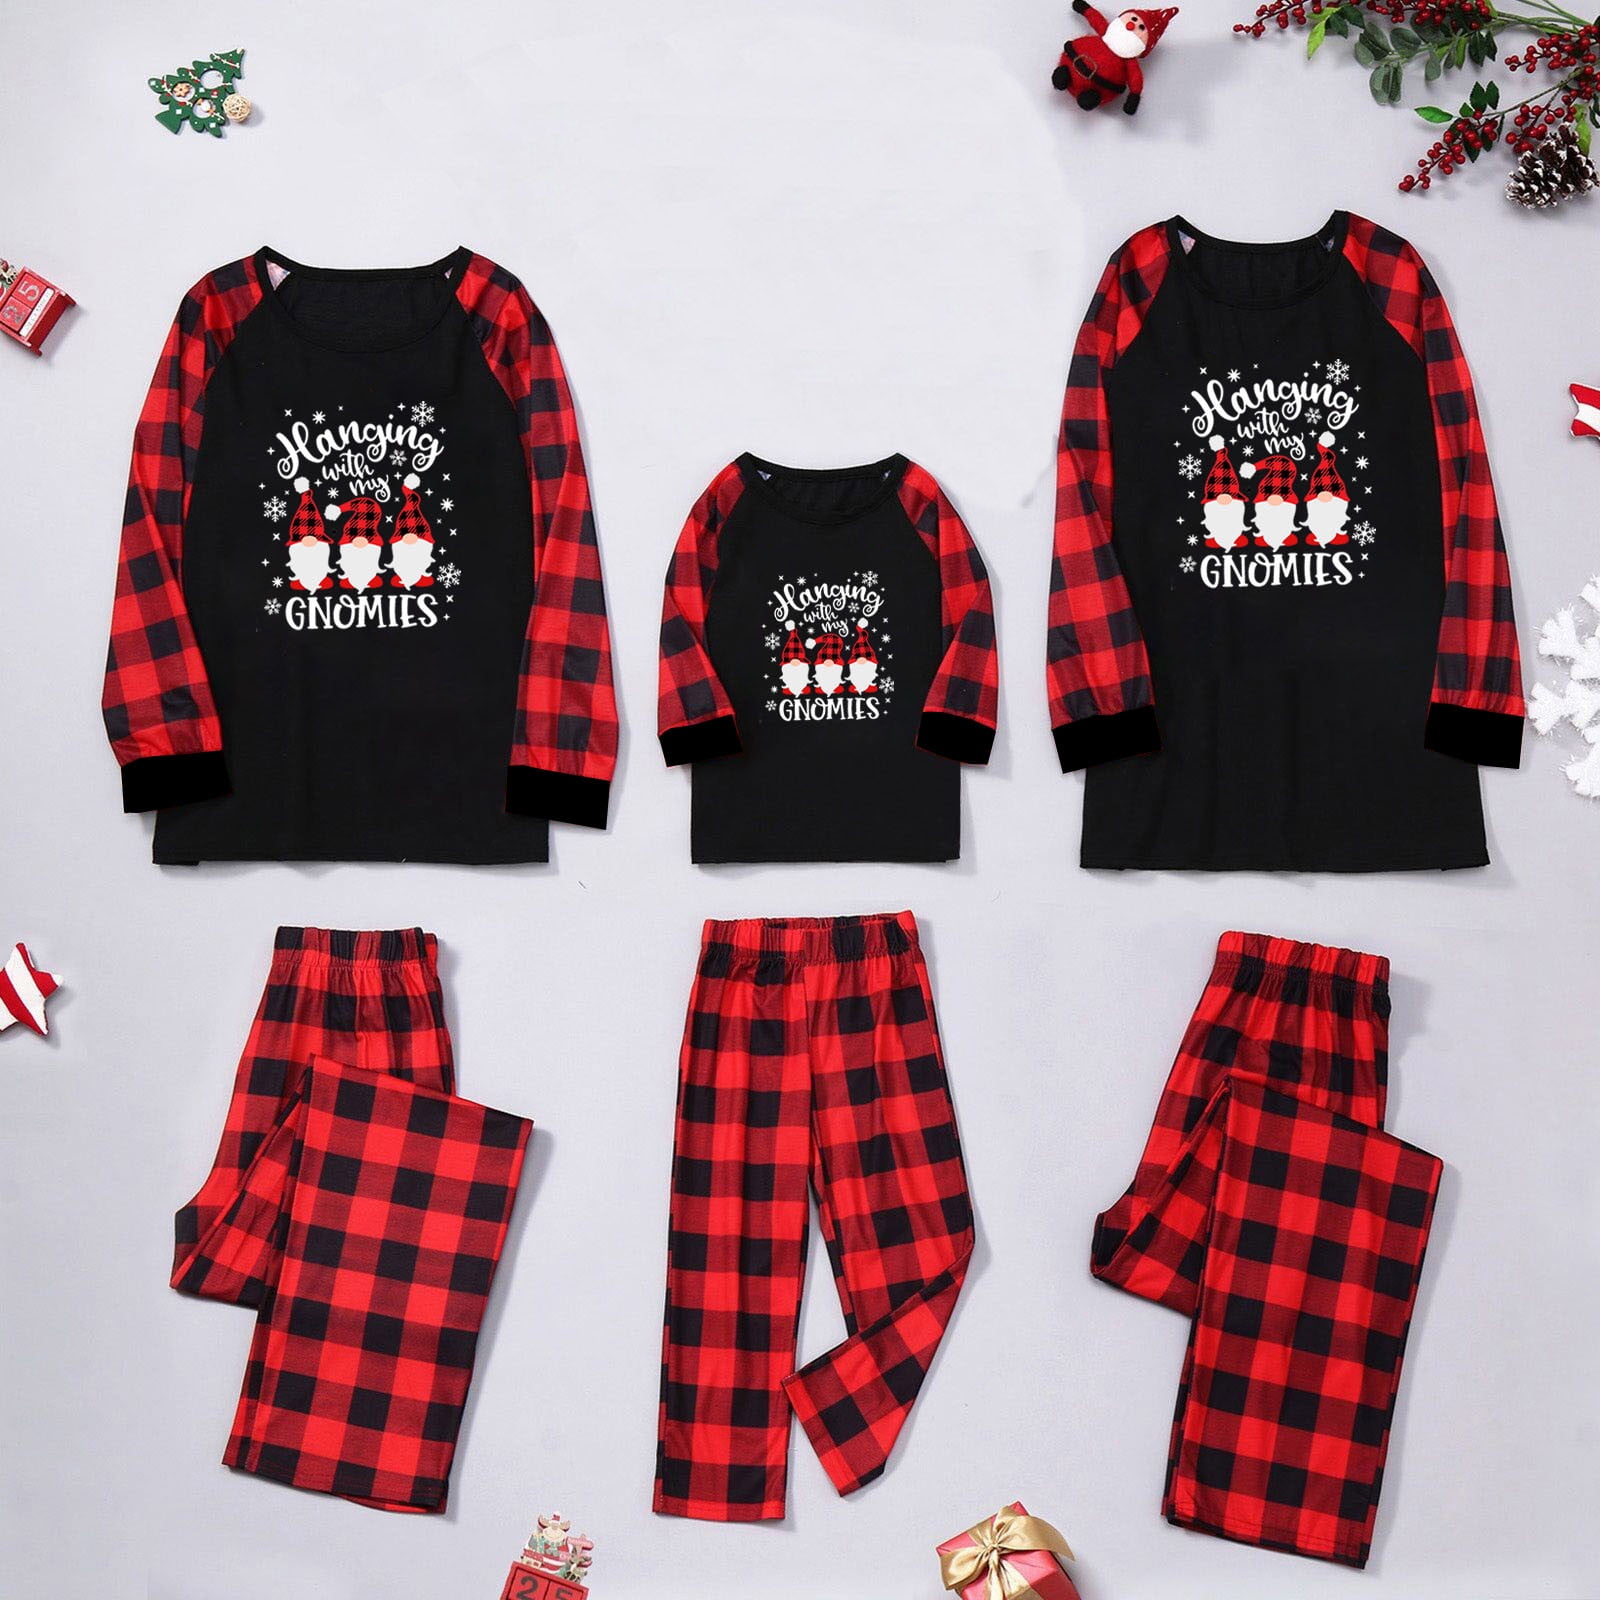 YYDGH Matching Jammies for Families Pajamas Sets Two-Piece Pj Sets Long ...